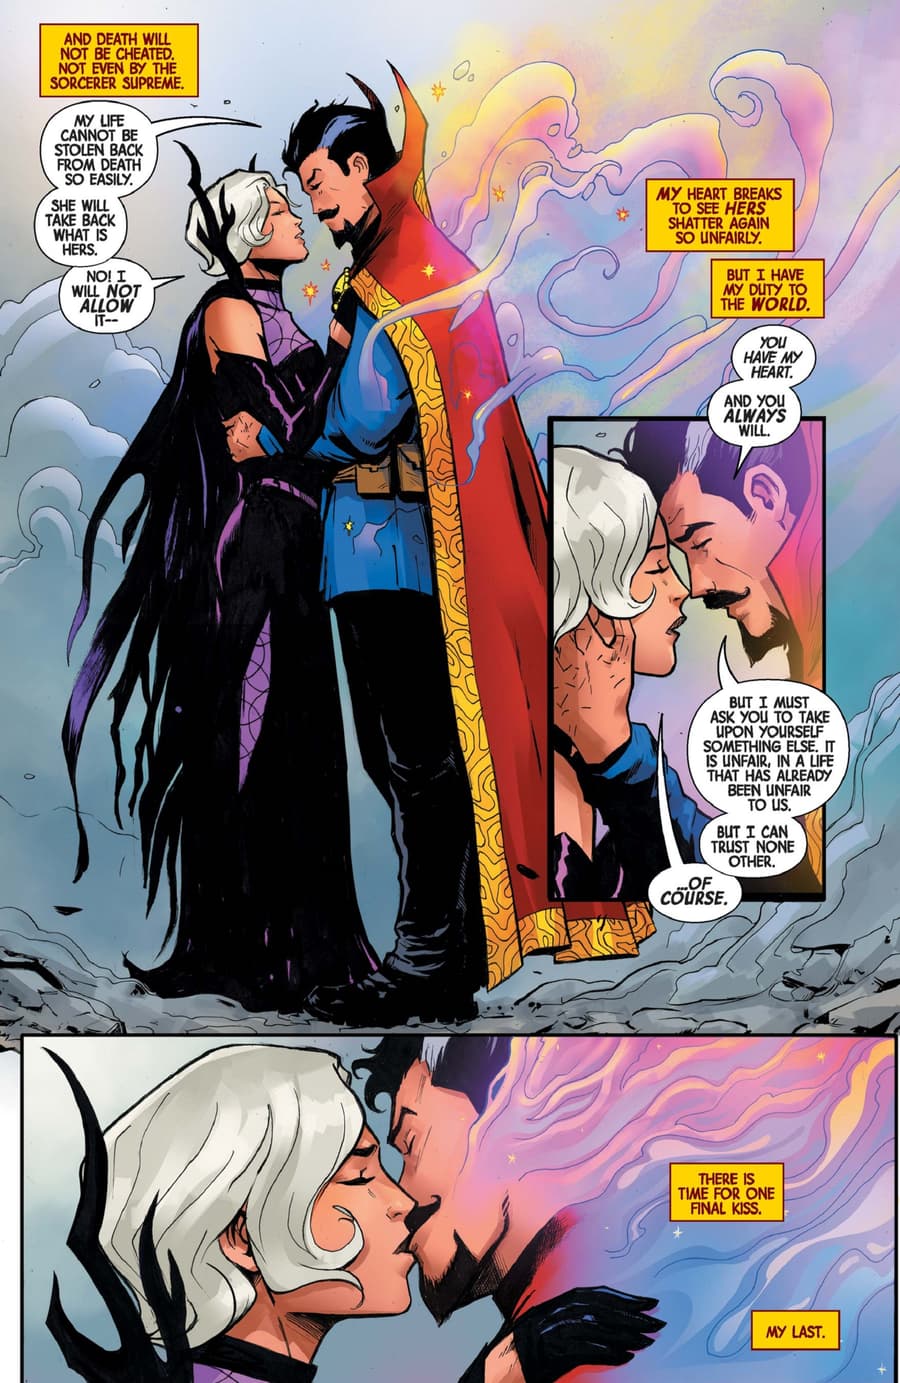 Strange and Clea share a final kiss in DEATH OF DOCTOR STRANGE (2021) #5.